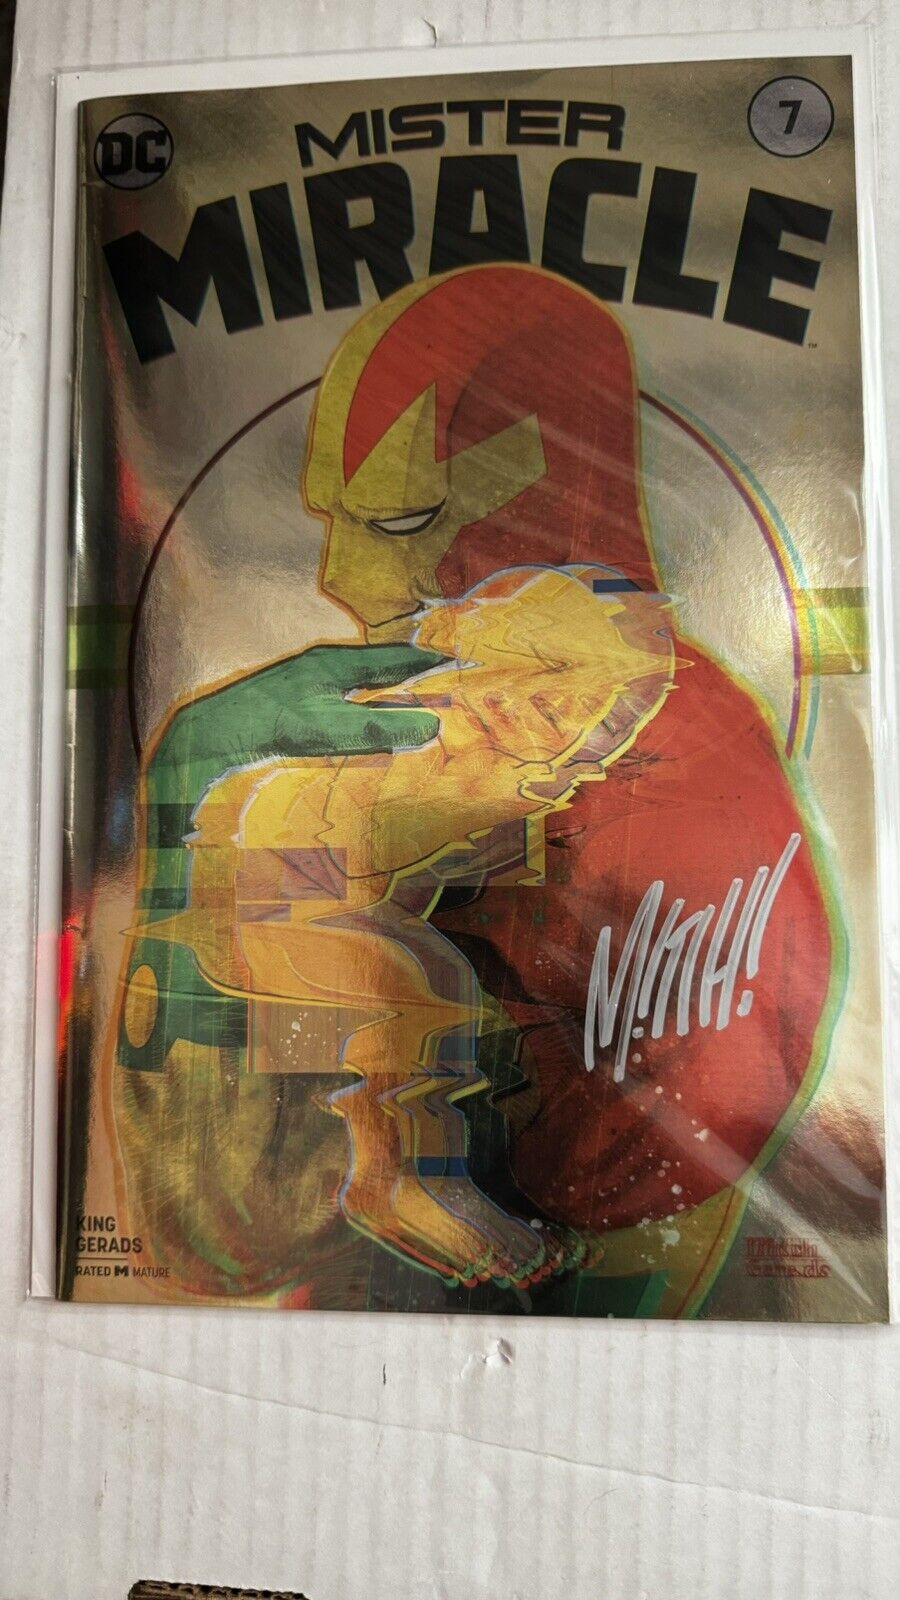 WonderCon 2018 Exclusive MISTER MIRACLE 7 Foil Variant SIGNED Mitch Gerads